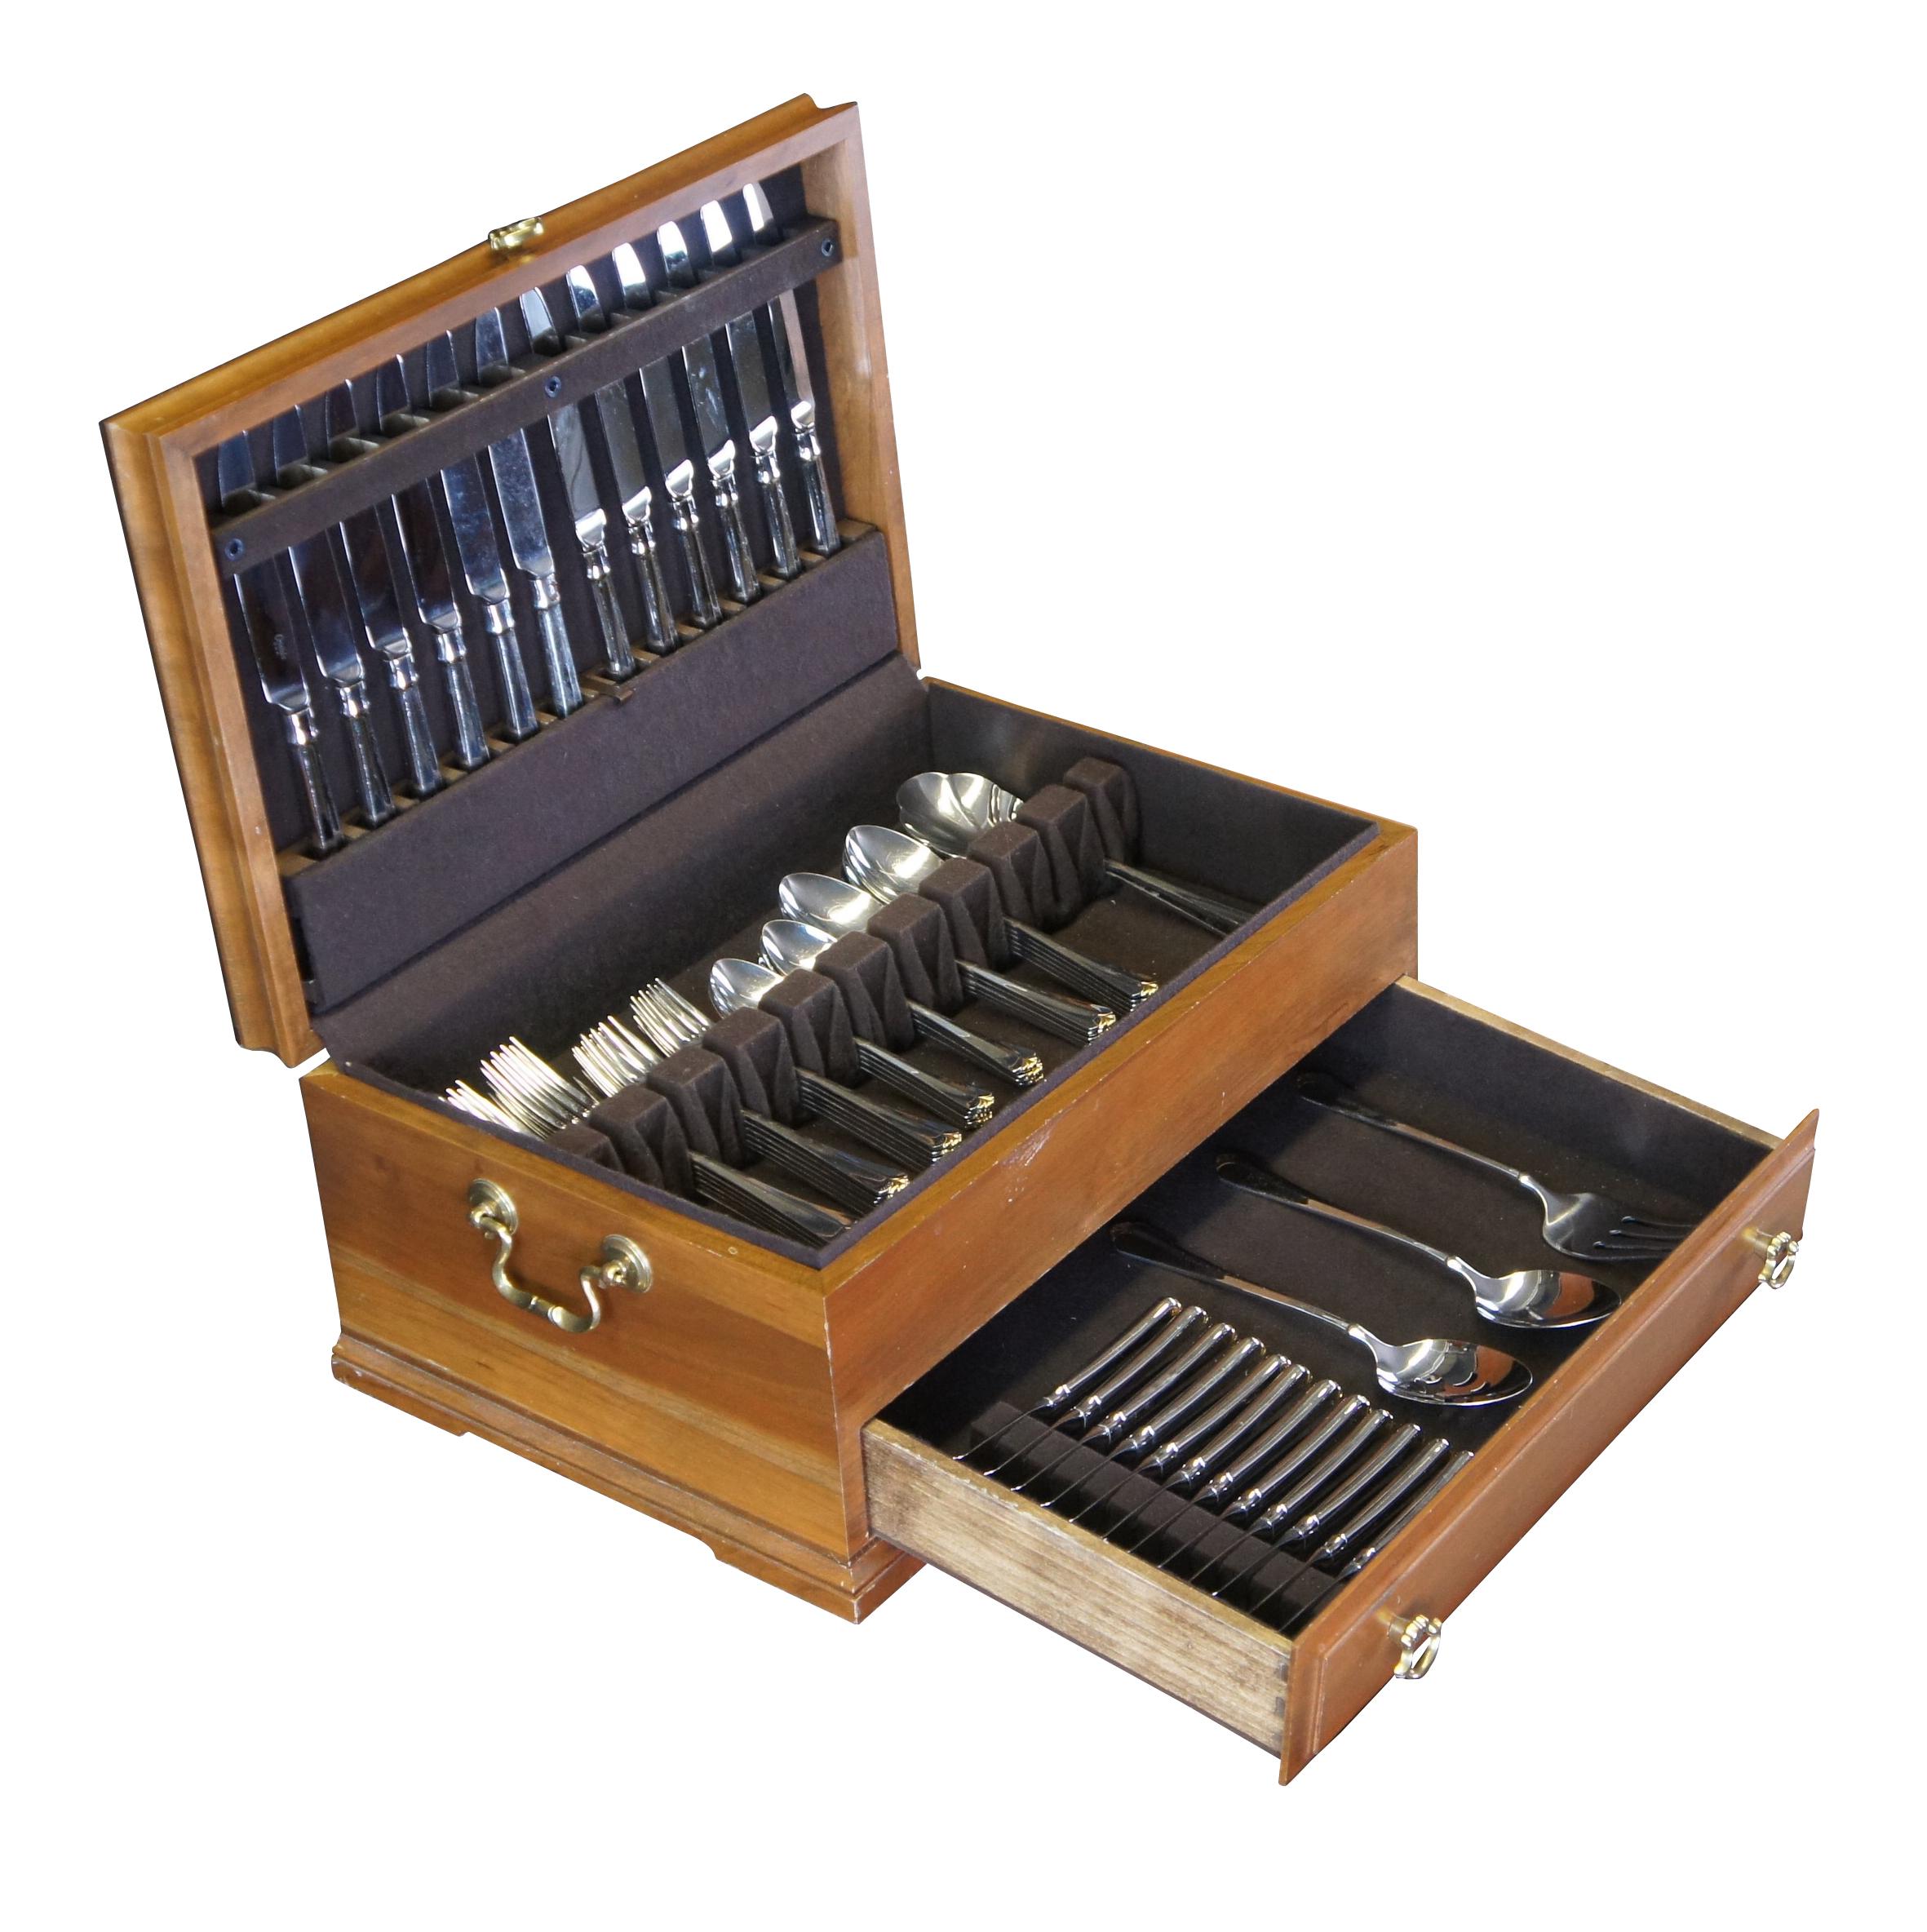 Oneida Golden Julliard, (stainless and gold accent), circa 1990s.  Includes a Mahogany case with dividers and drawer

Includes
12 dinner forks
12 salad forks
12 knives
11 spoons
10 teaspoons
12 butter knives
5 serving pieces

Dimensions:
box 18